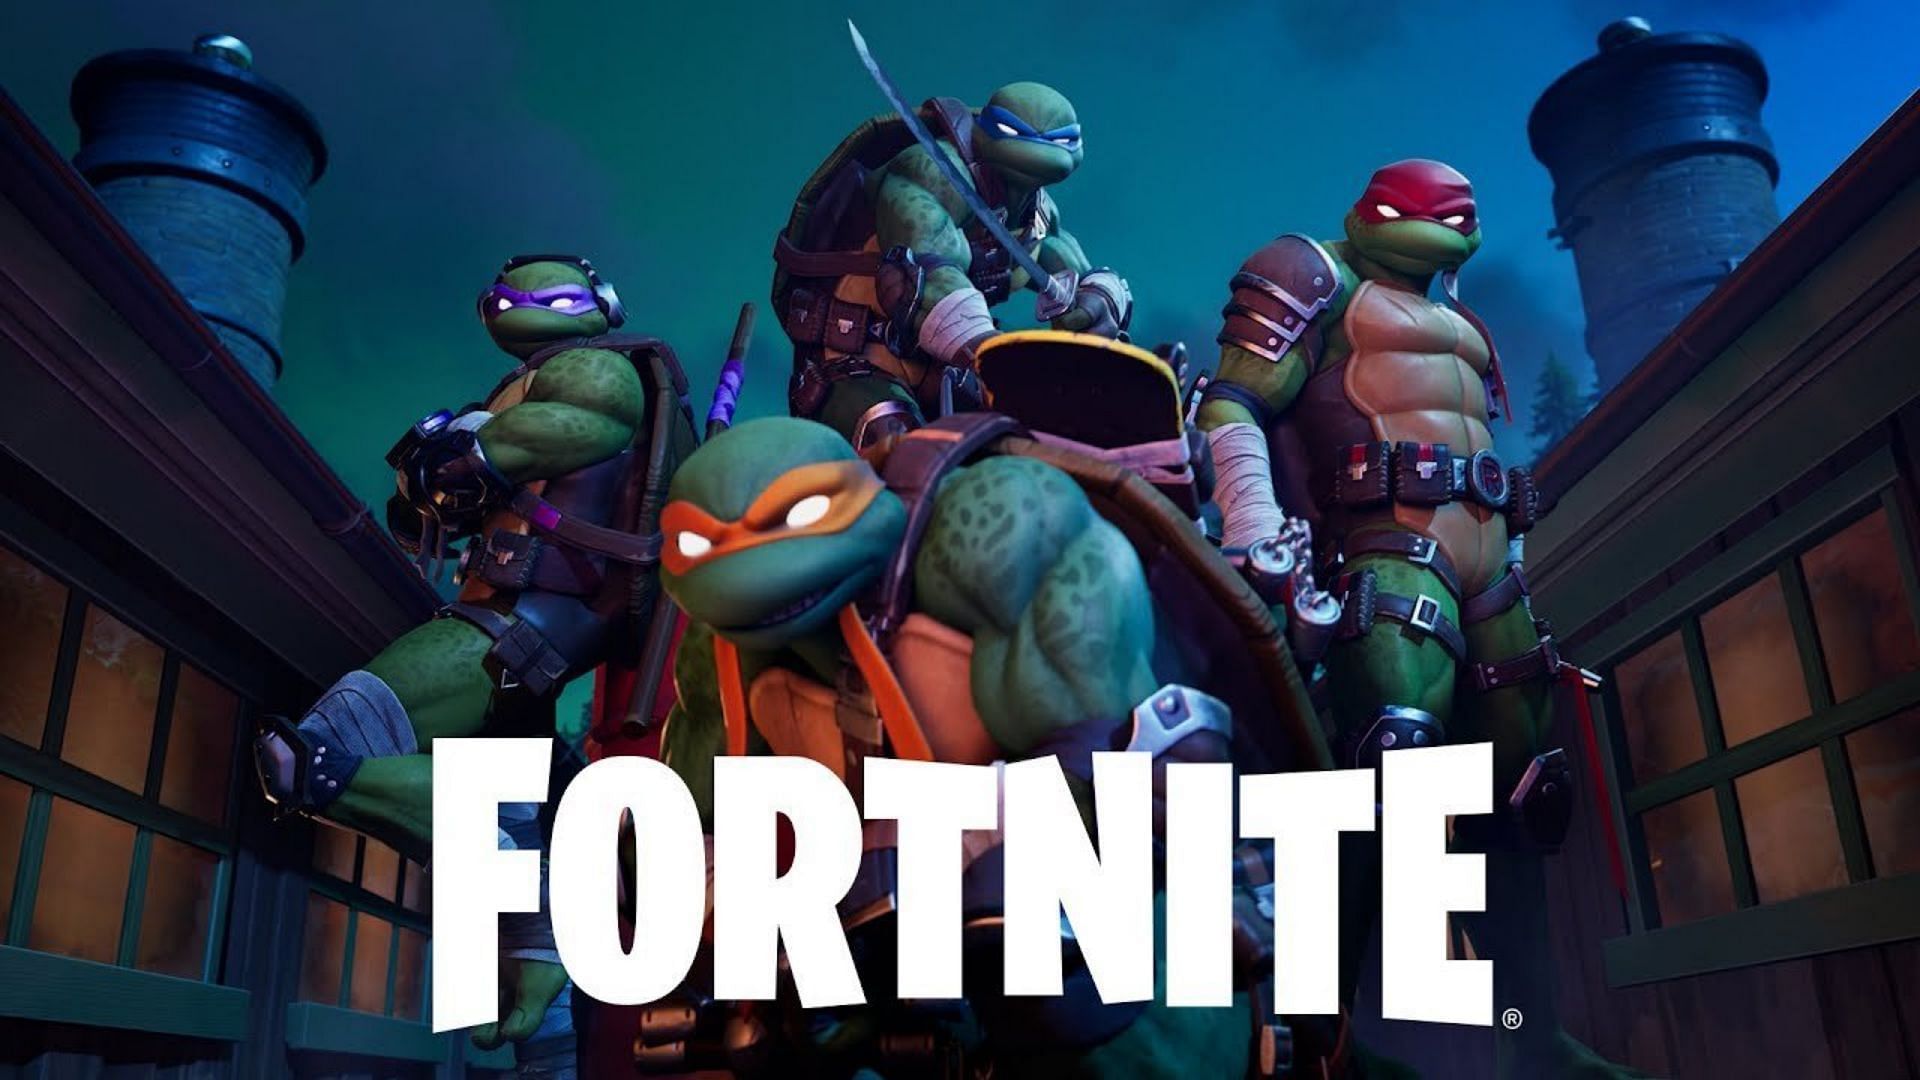 Fortnite Teenage Mutant Ninja Turtles event trailer: Where to watch, release time, and more